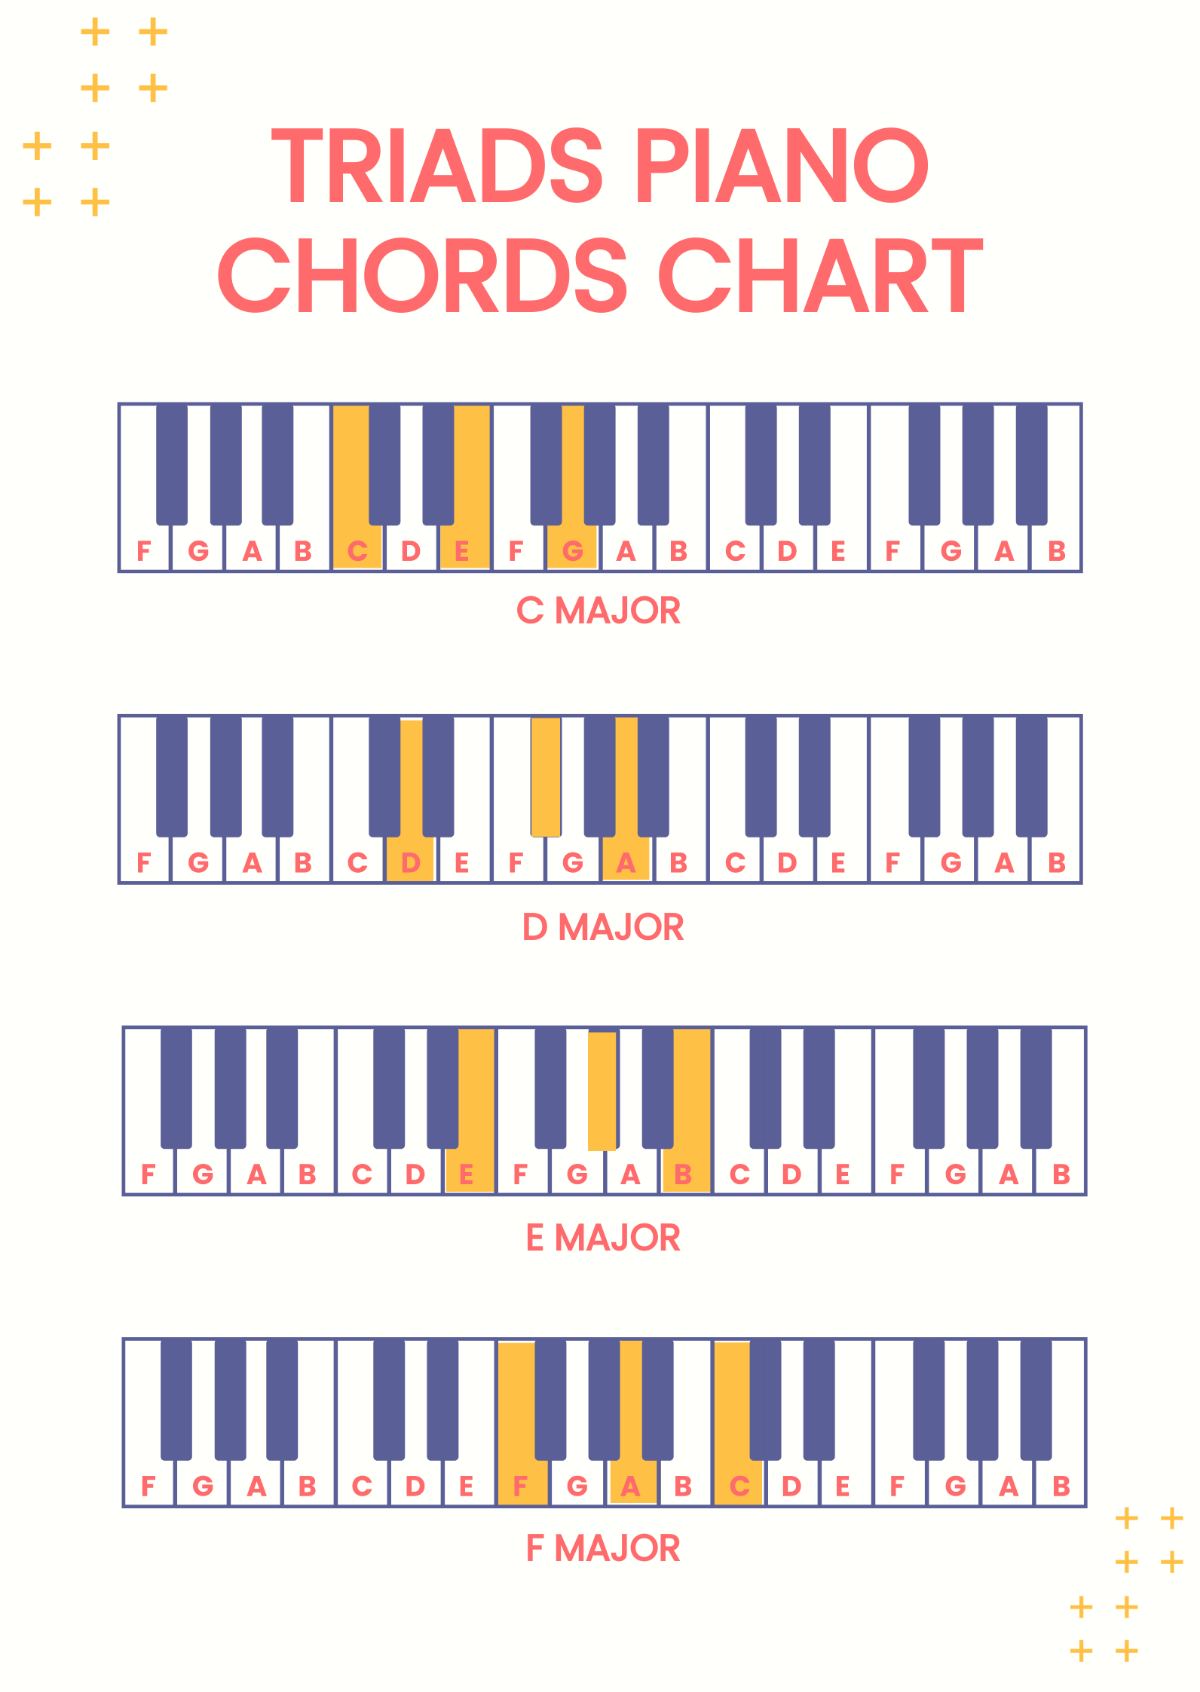 Triads Piano Chords Chart Template